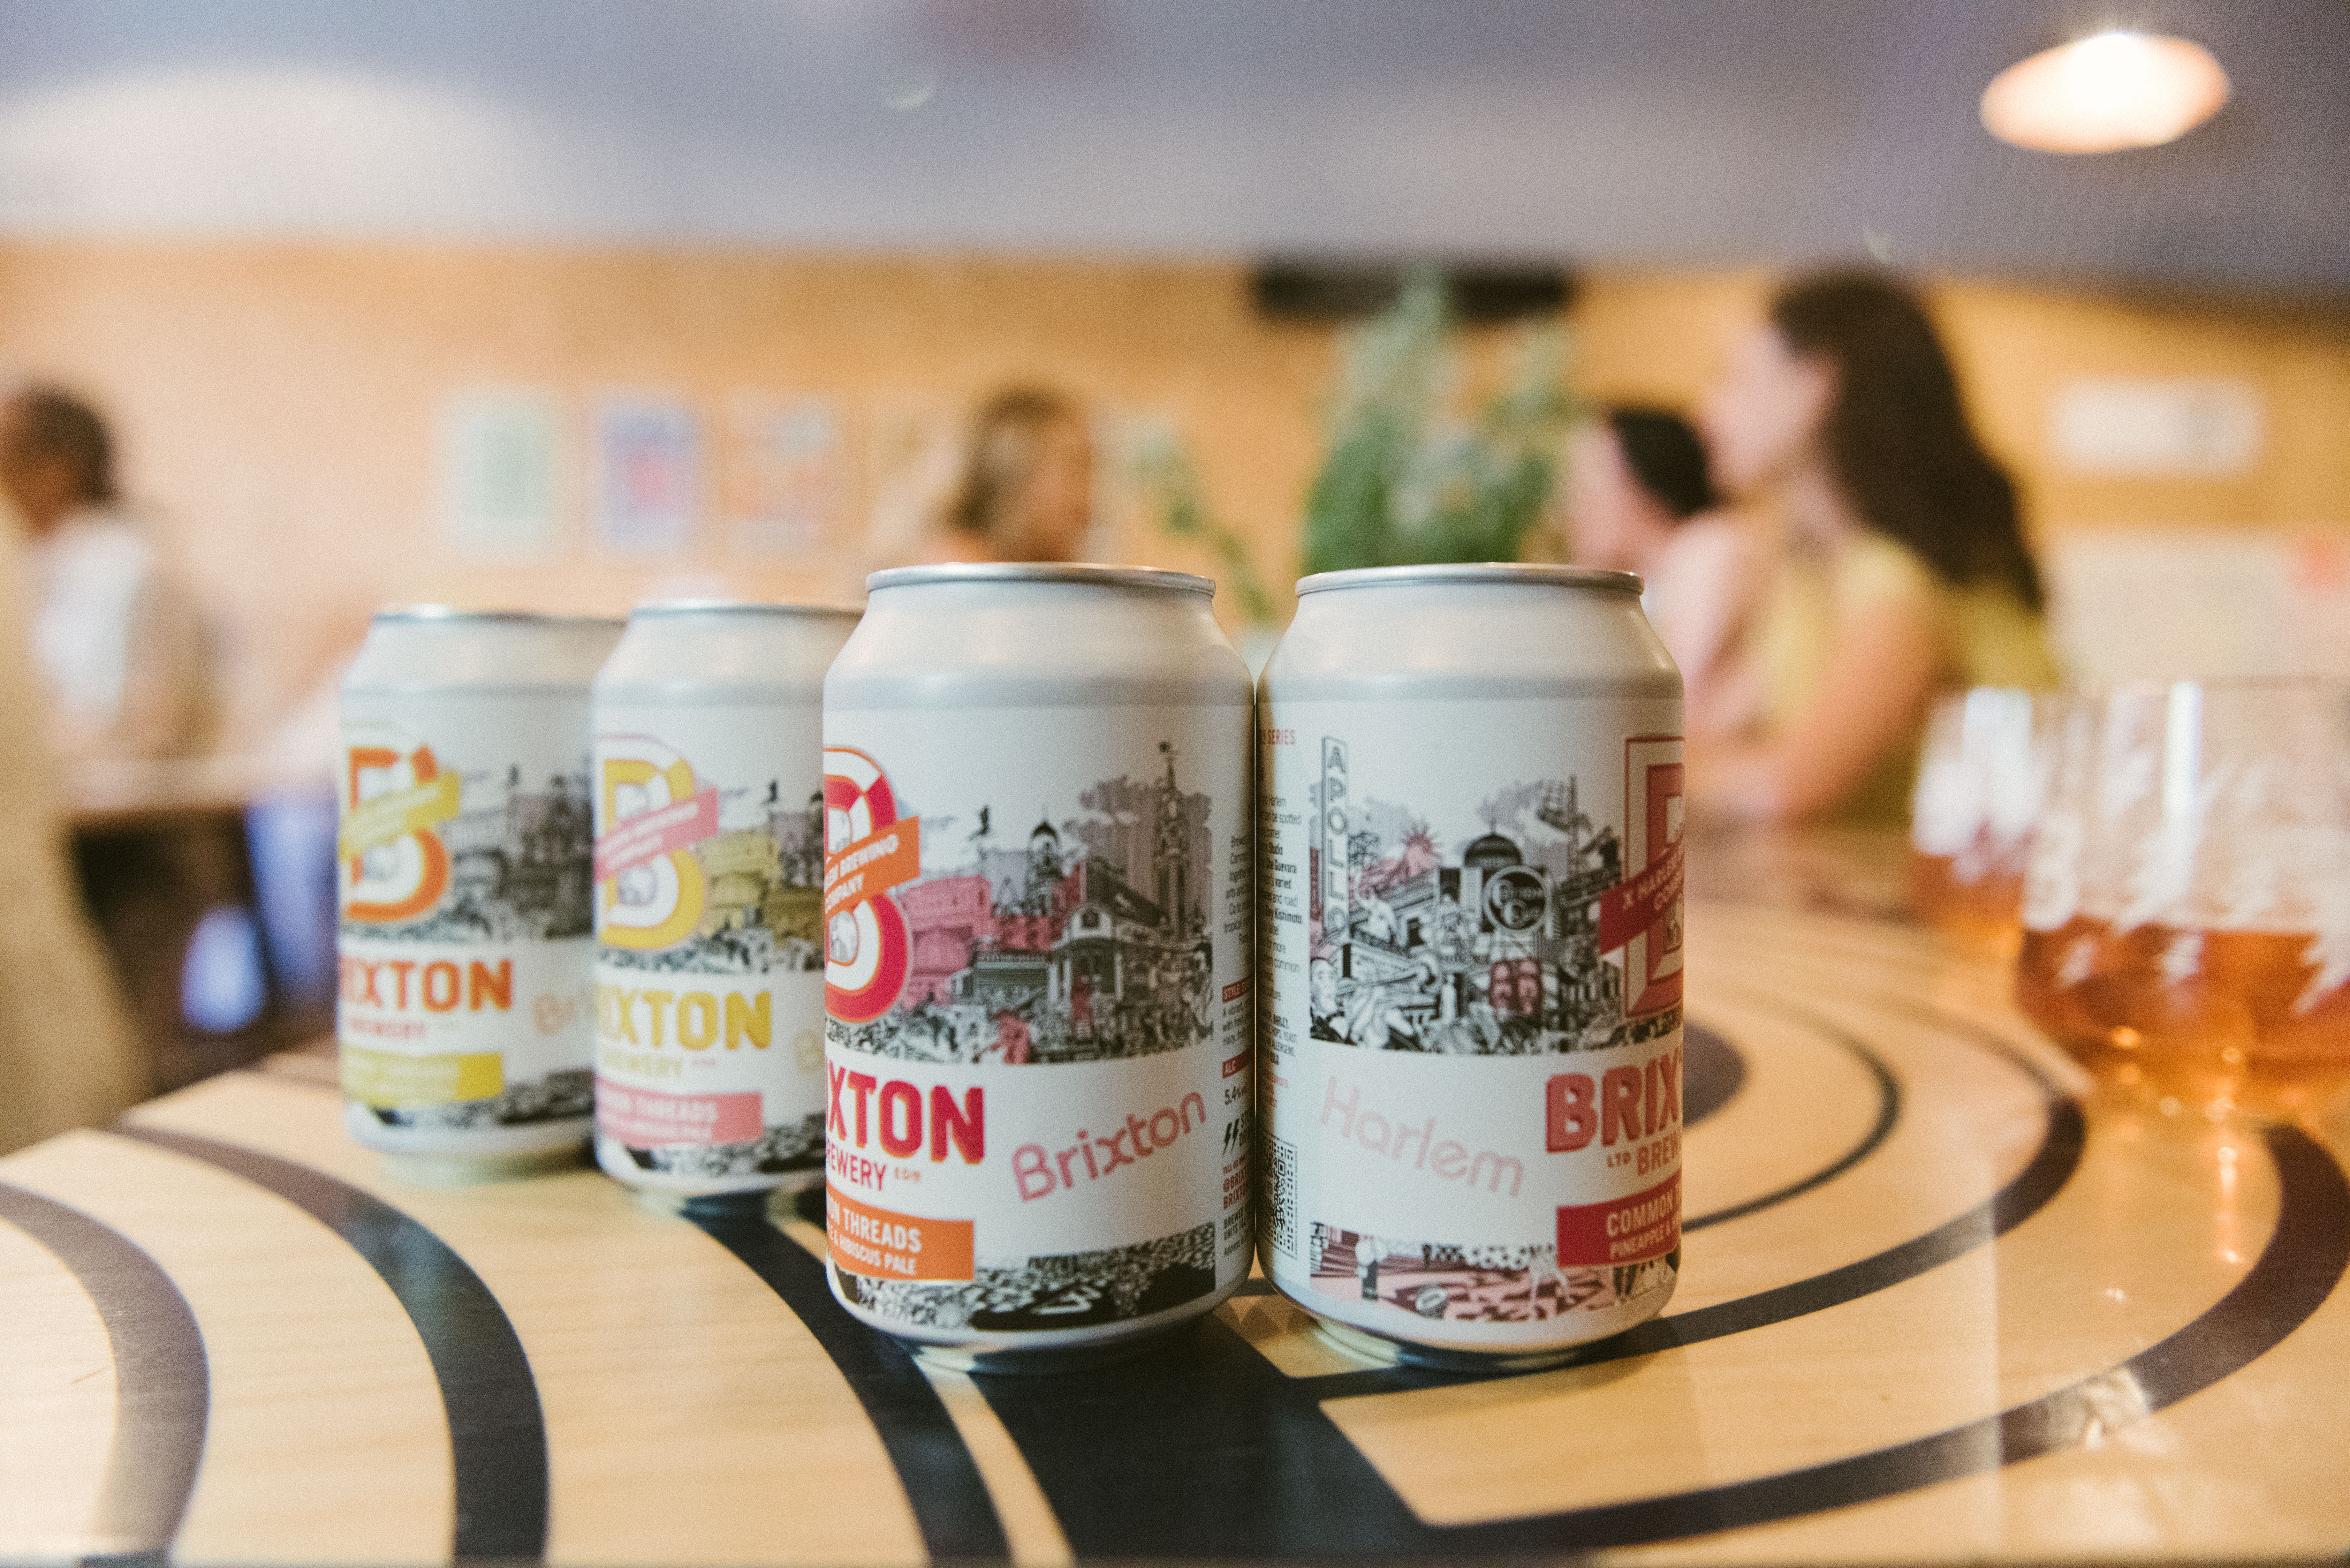 Cans of Brixton X Harlem brew 